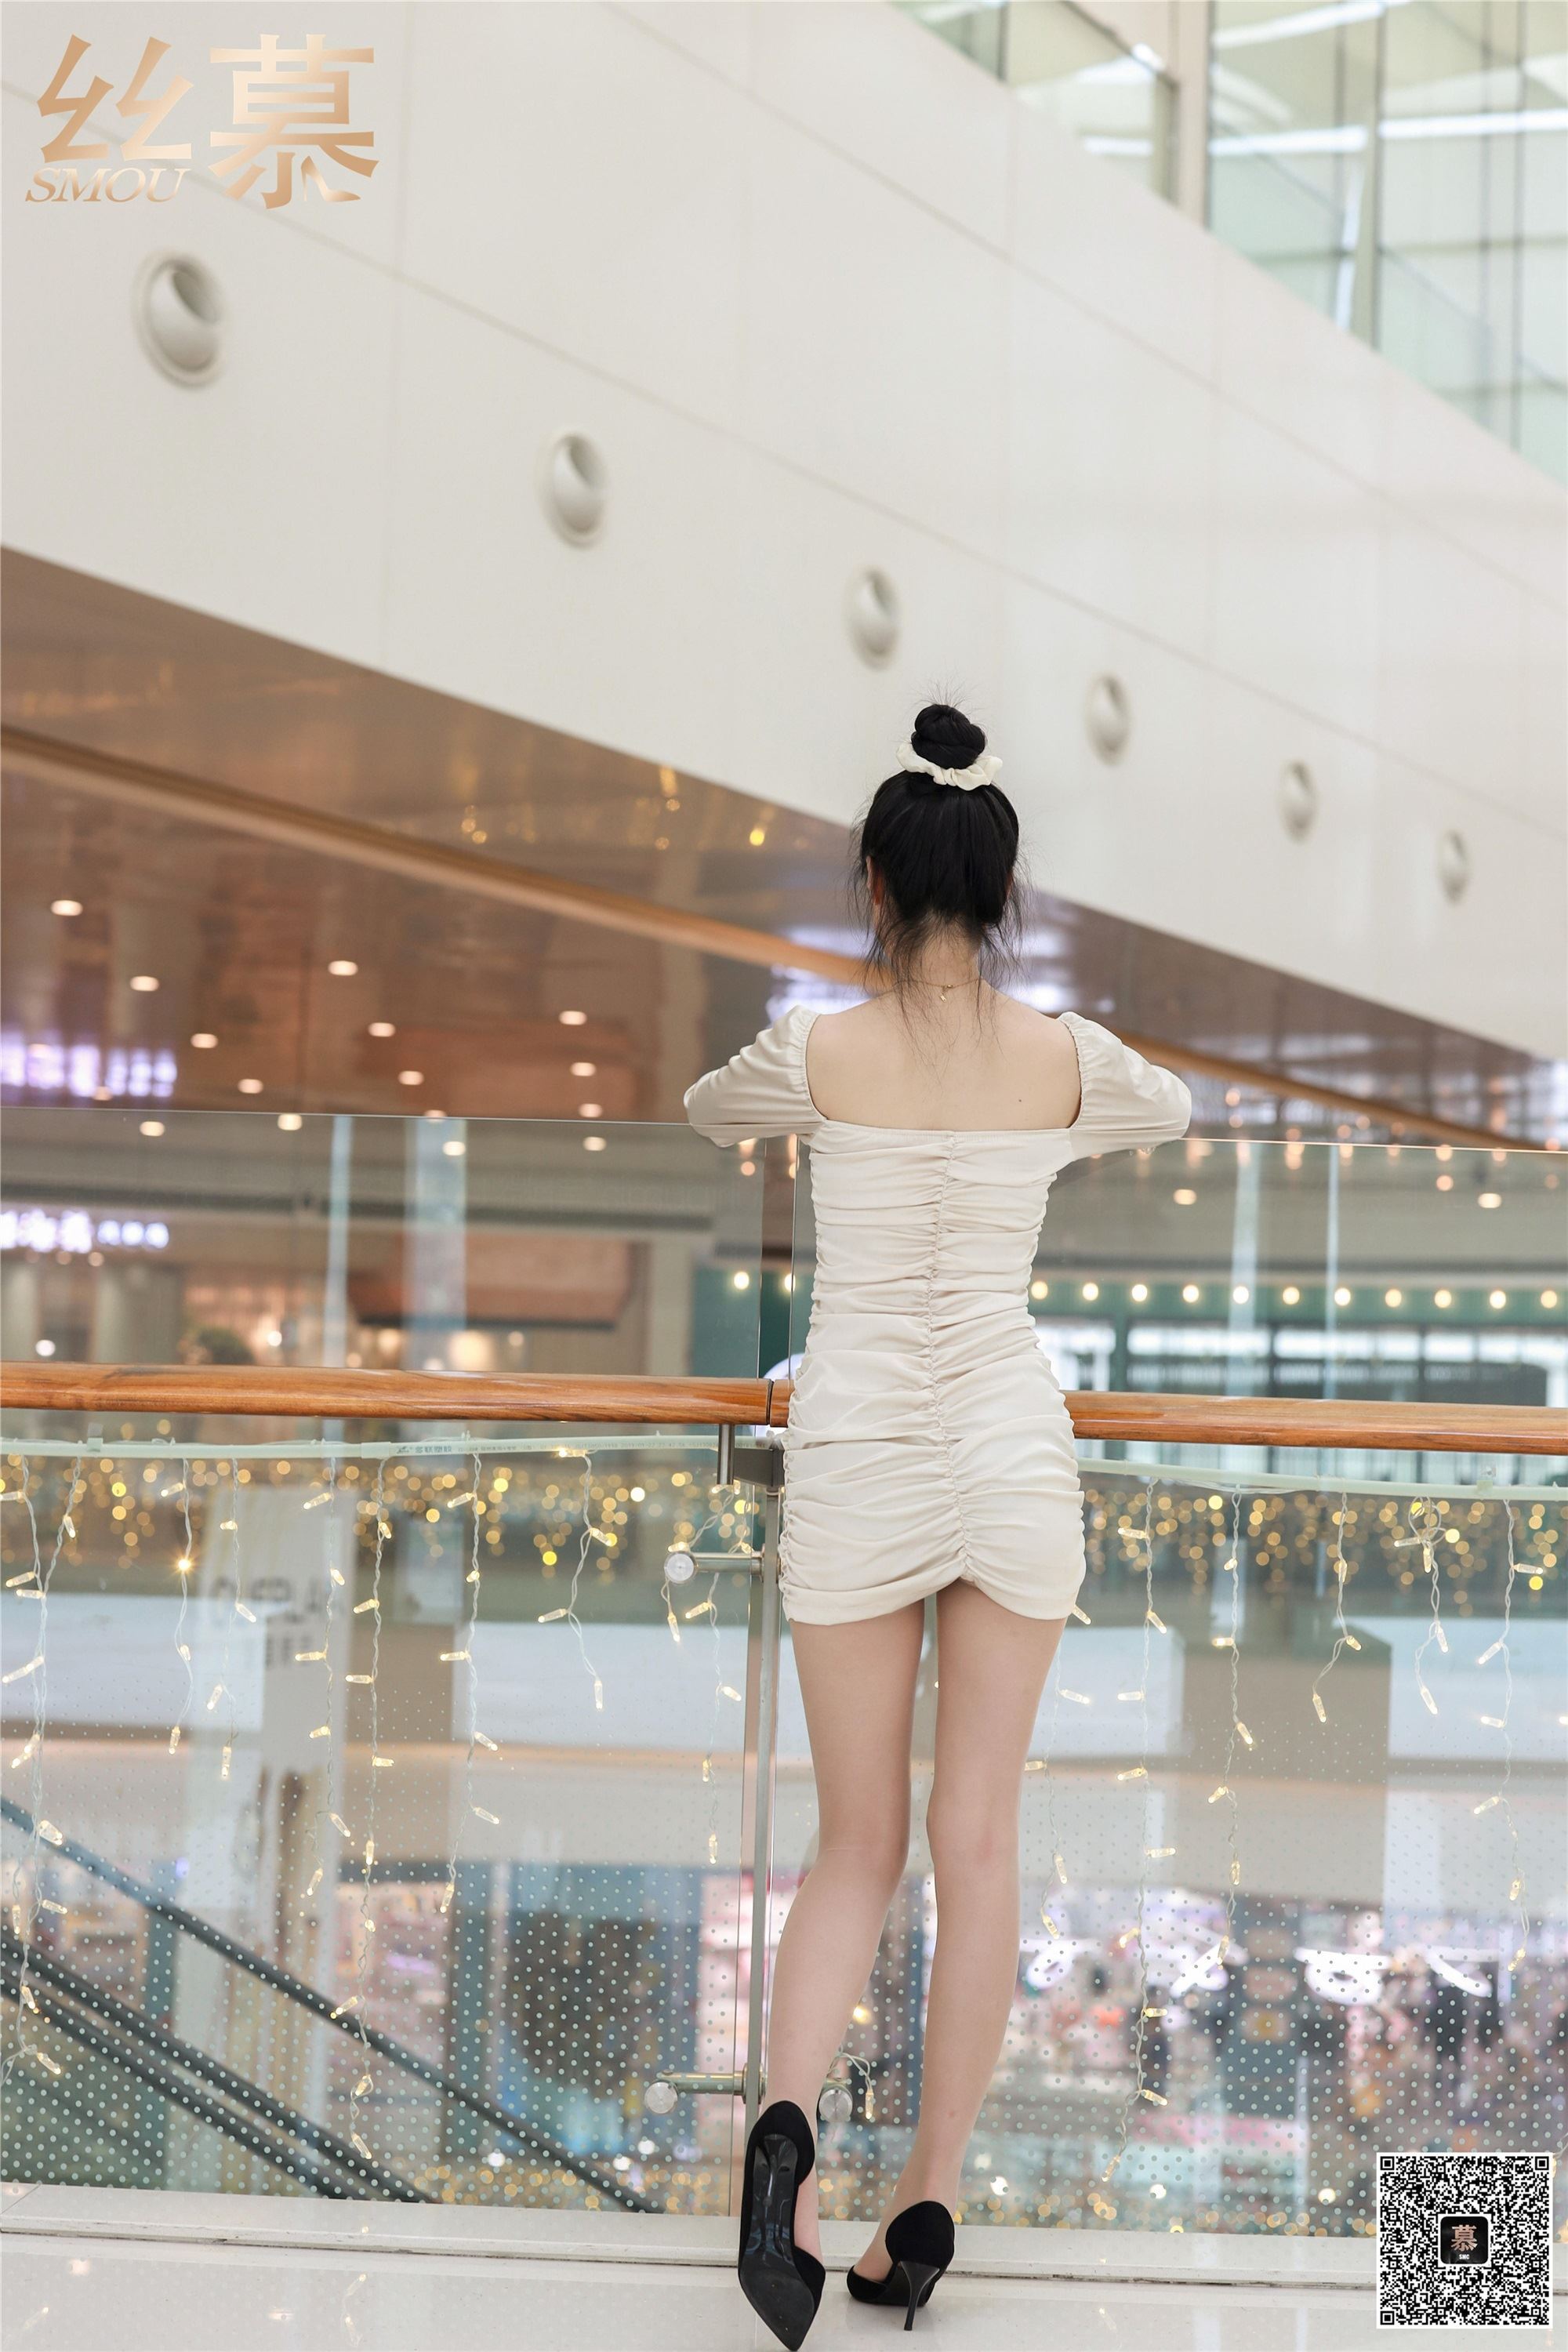 Simu's sm339 Feifei's encounter with a schoolgirl in a shopping mall